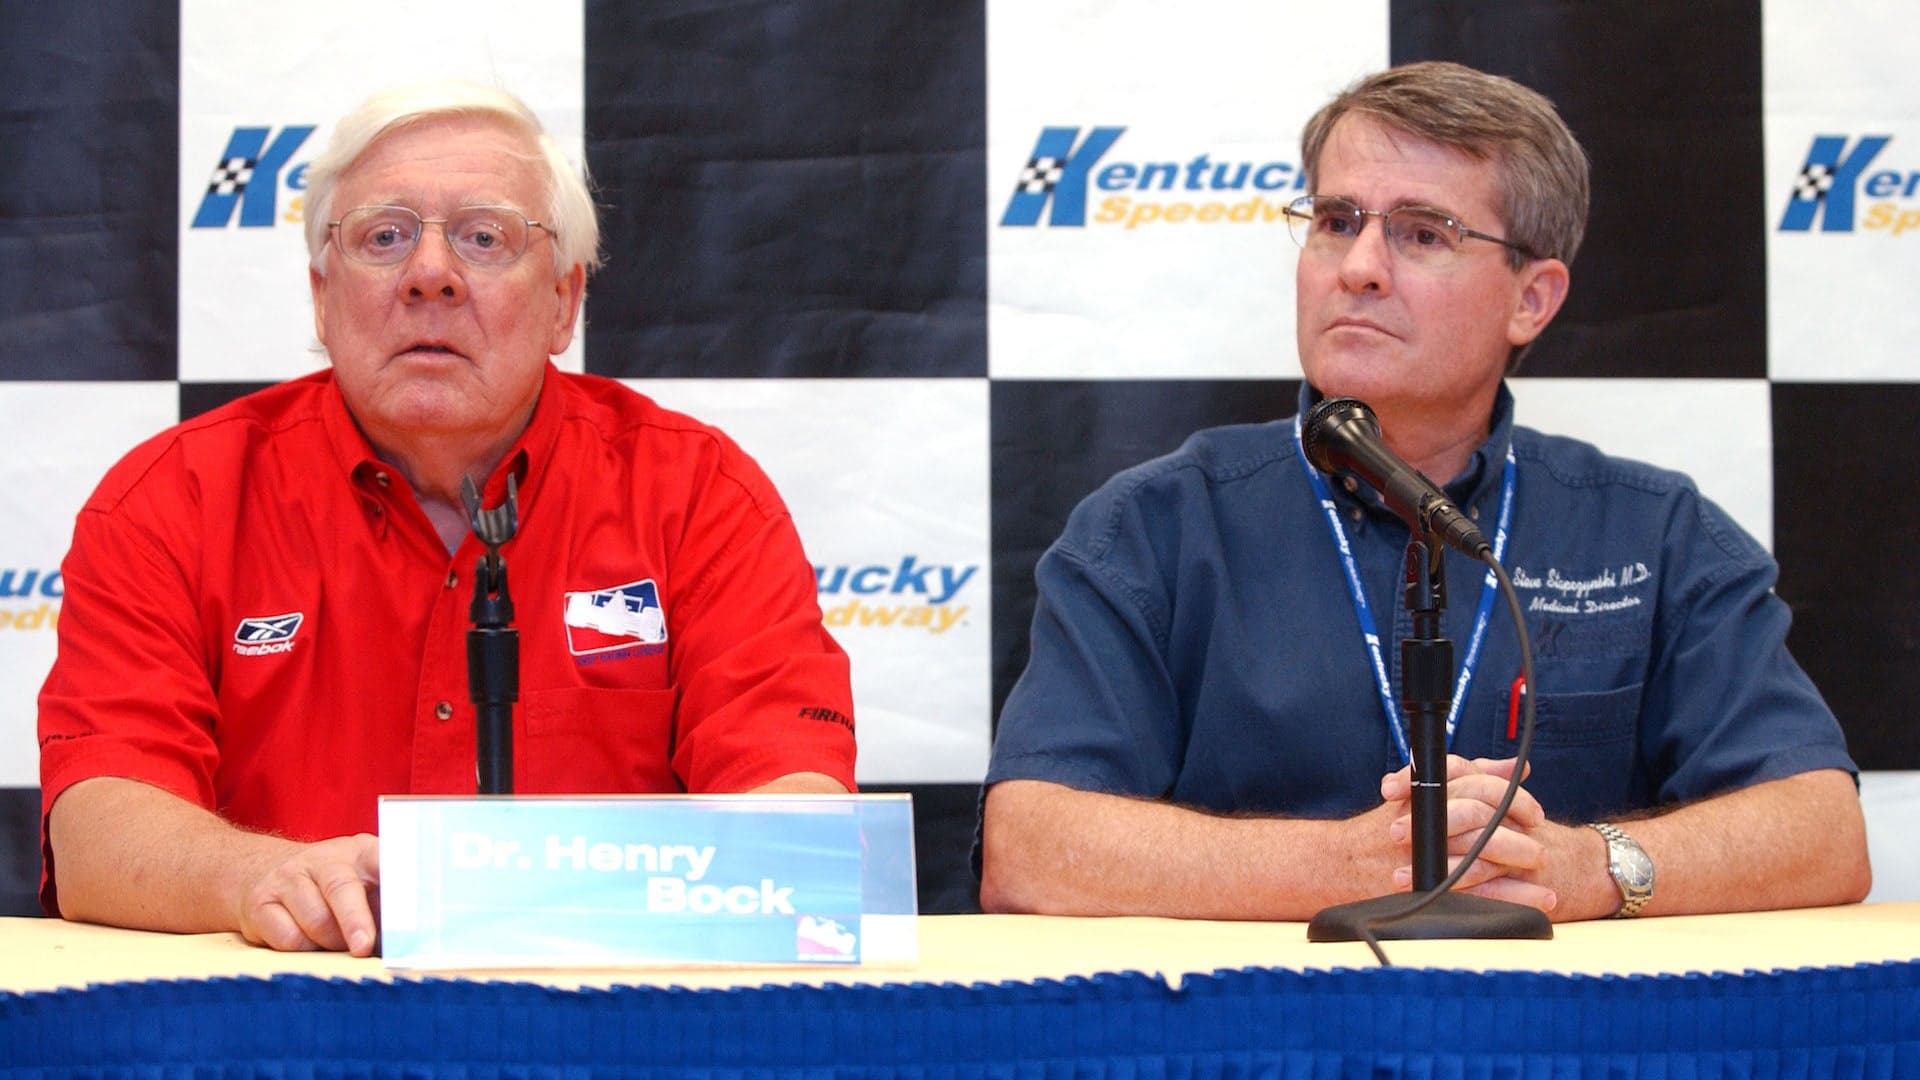 Former IndyCar Medical Director and Safety Tech Pioneer Henry Bock Dies